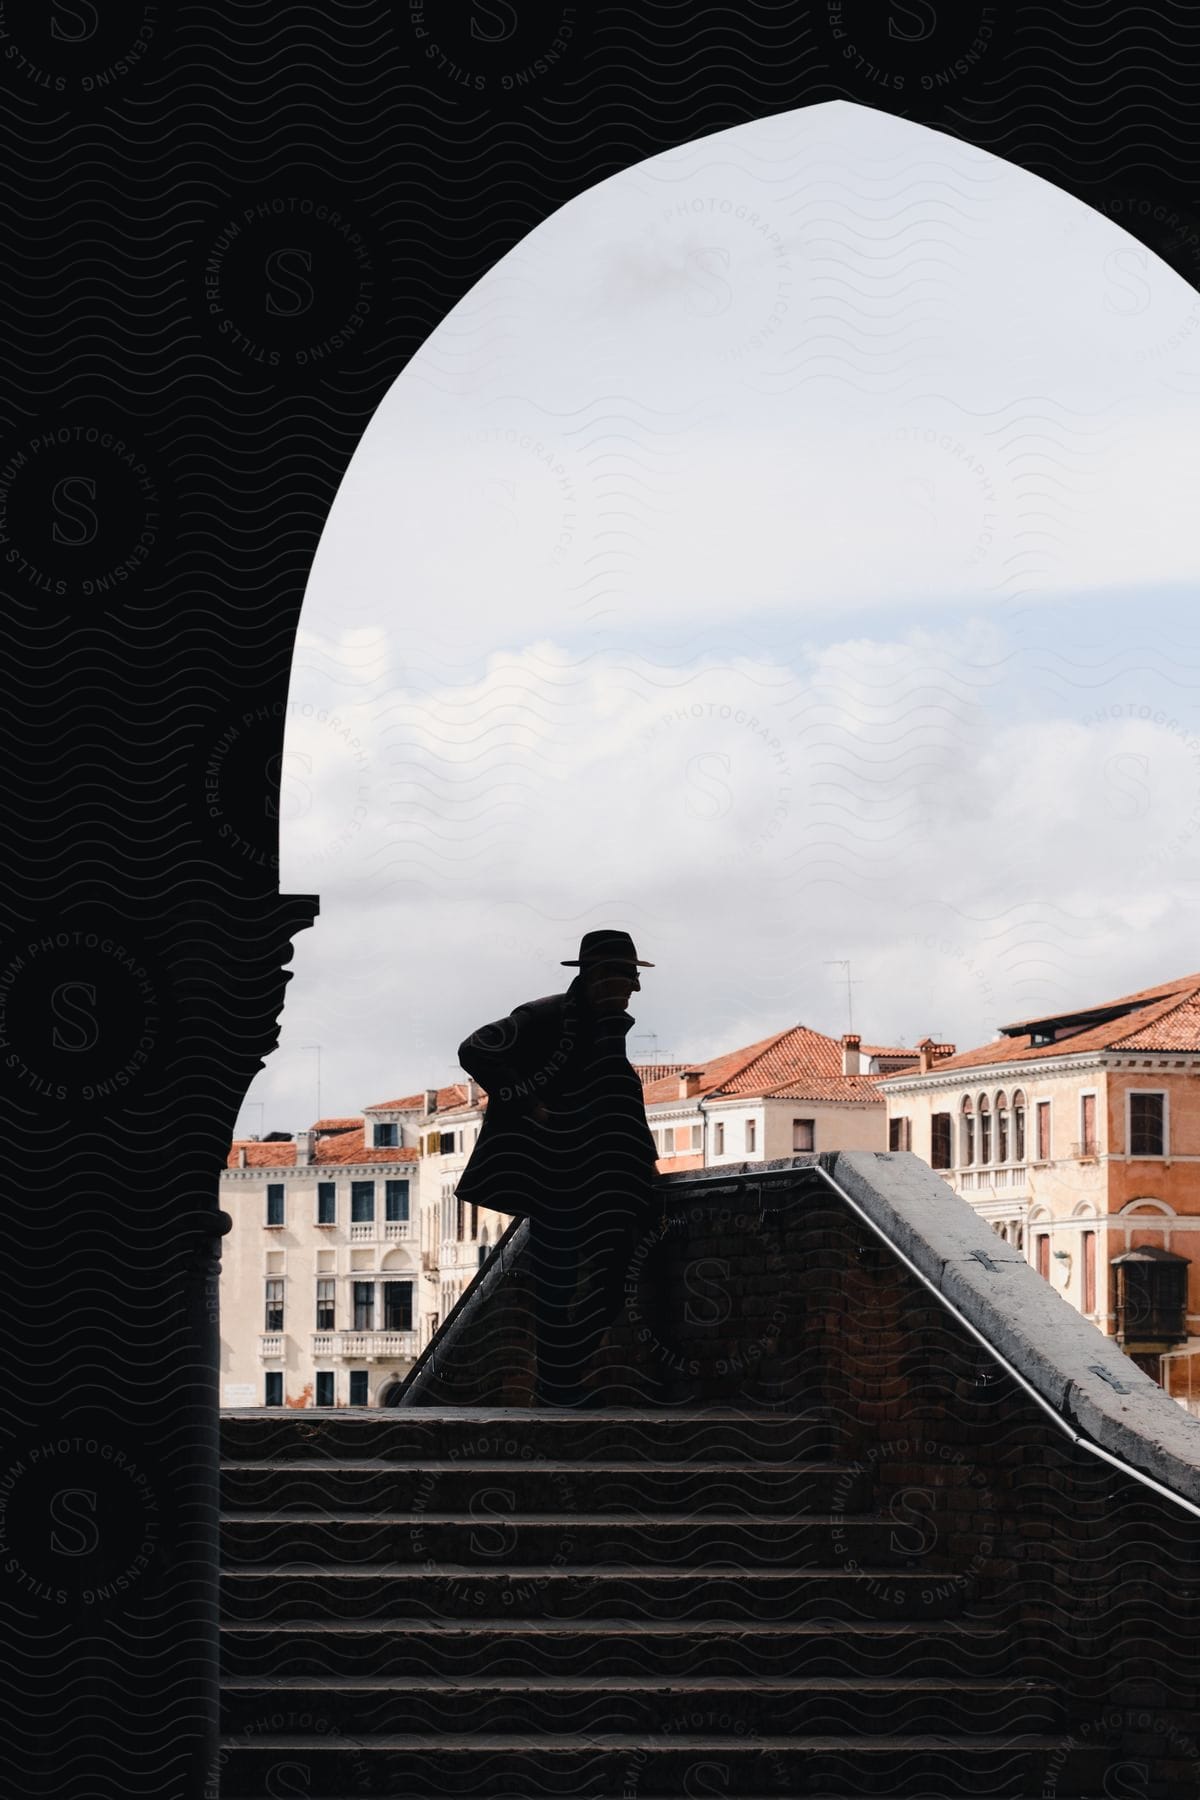 The silhouette of a man in profile and an arch on a bridge overlooking row houses and buildings